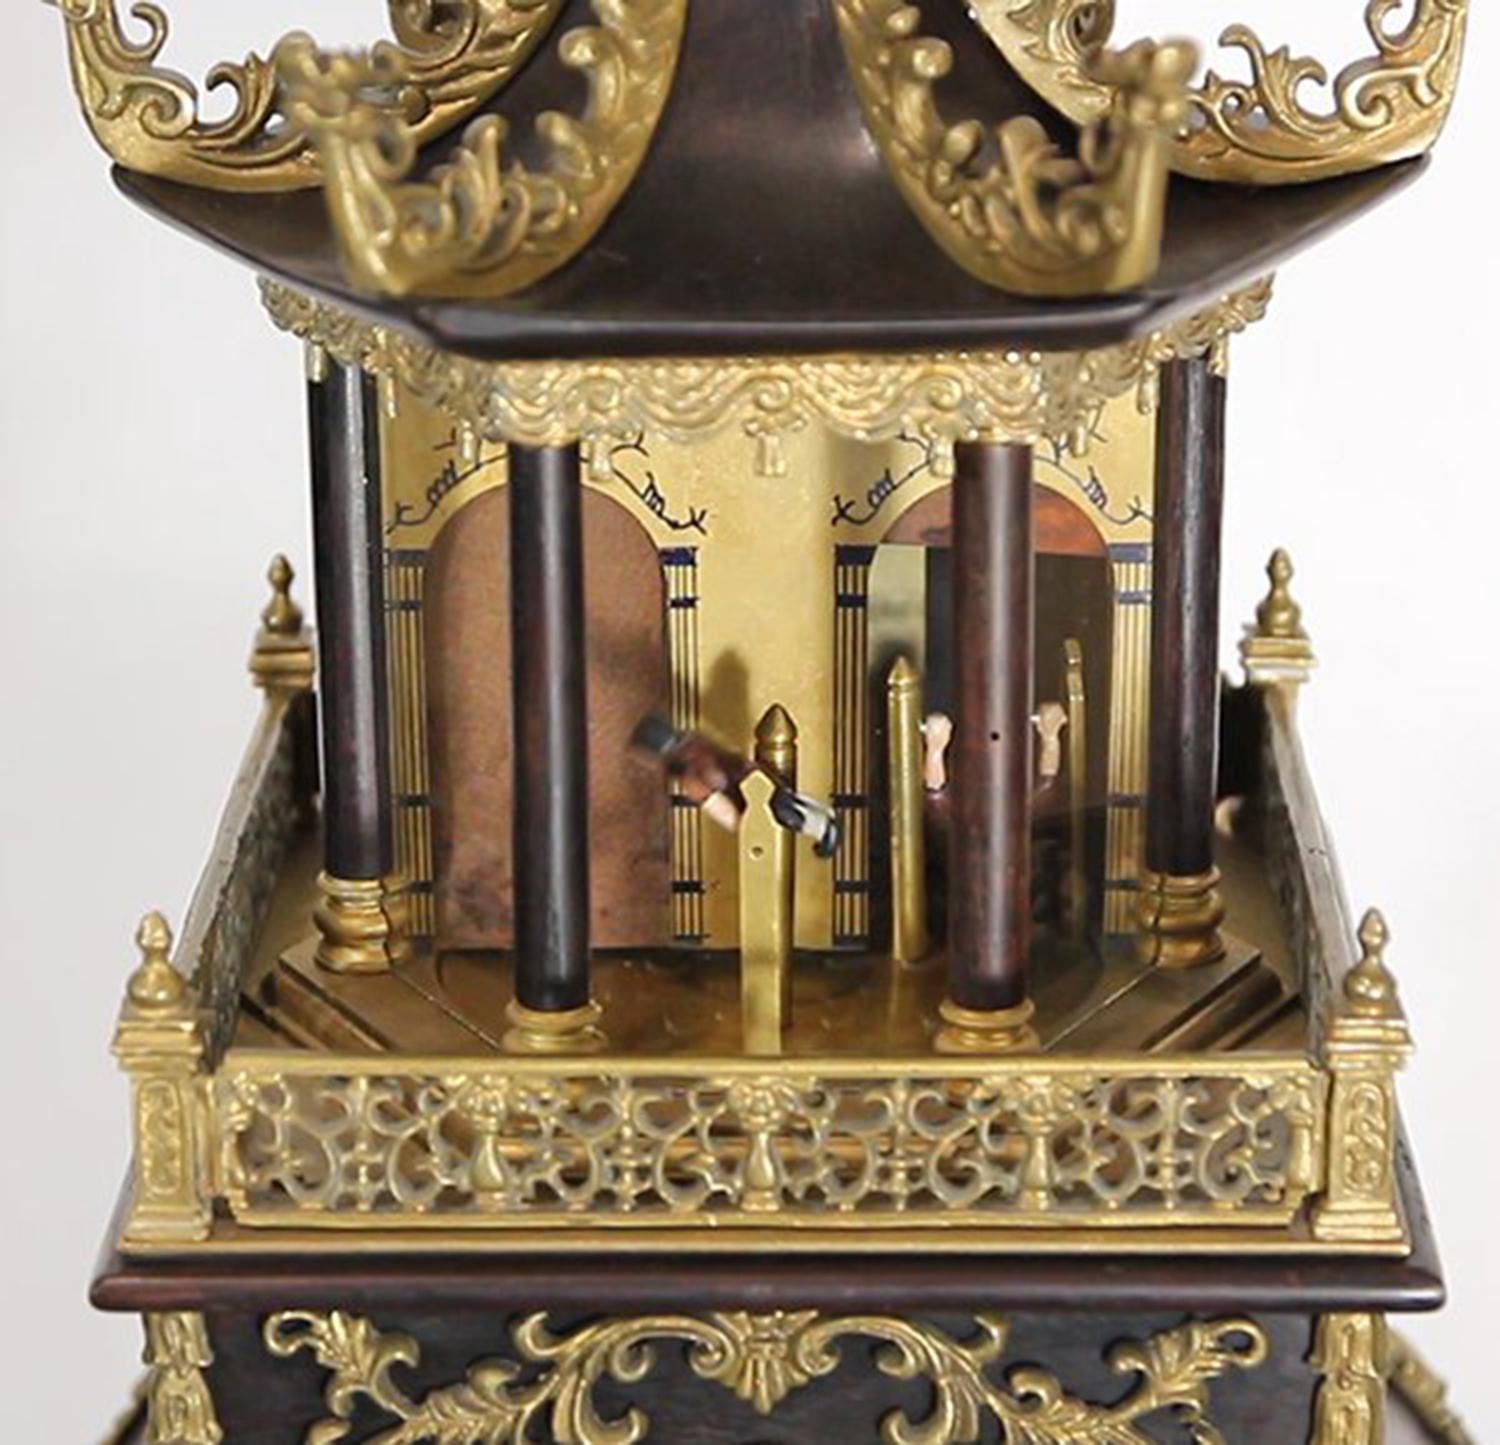 Hand-Crafted Vintage Chinese Canton Automaton Acrobat Musical Pagoda Waterfall Bracket Clock For Sale